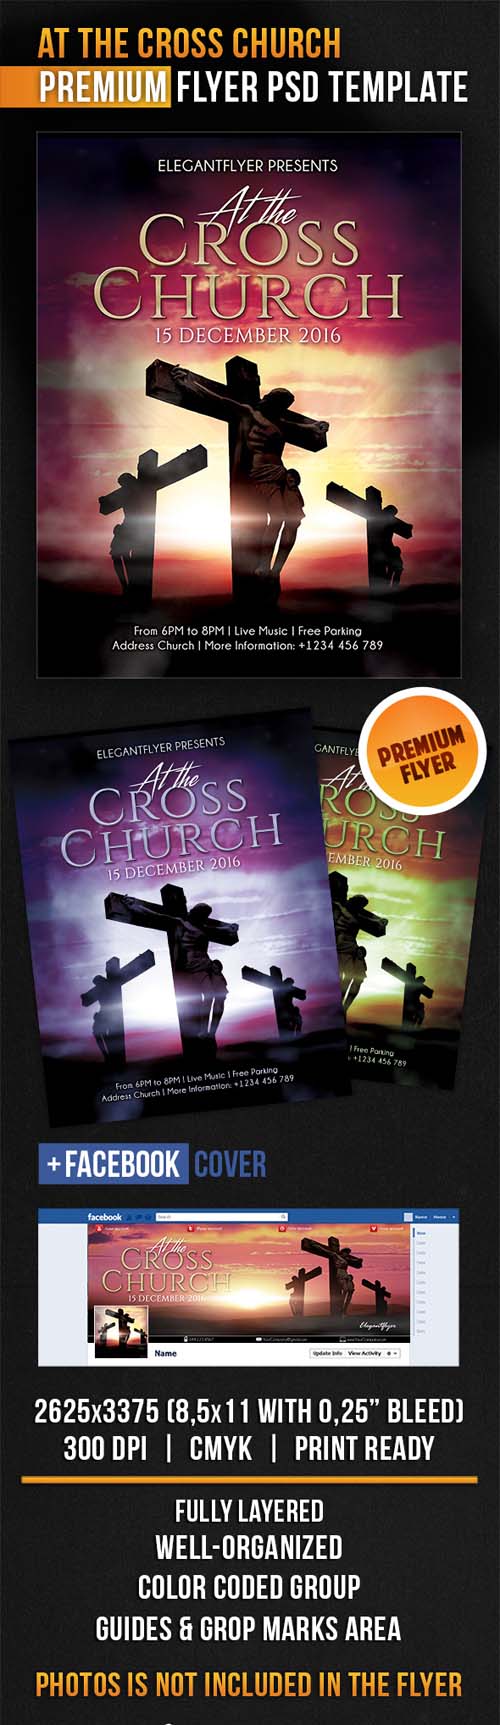 Flyer PSD Template - At the Cross Church + Facebook Cover 3